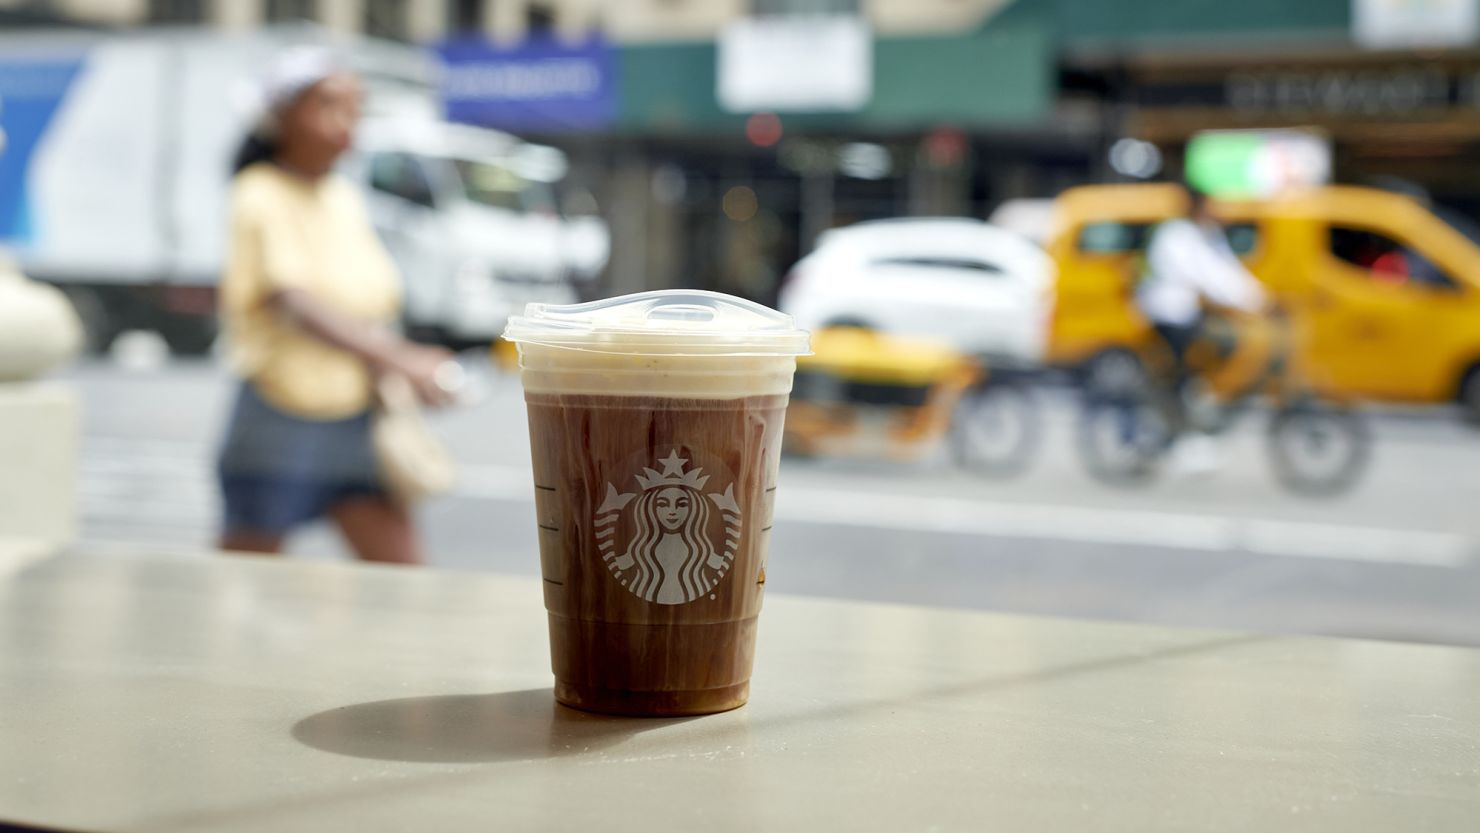 Starbucks sales spiked this quarter, thanks in part to its premium beverages.